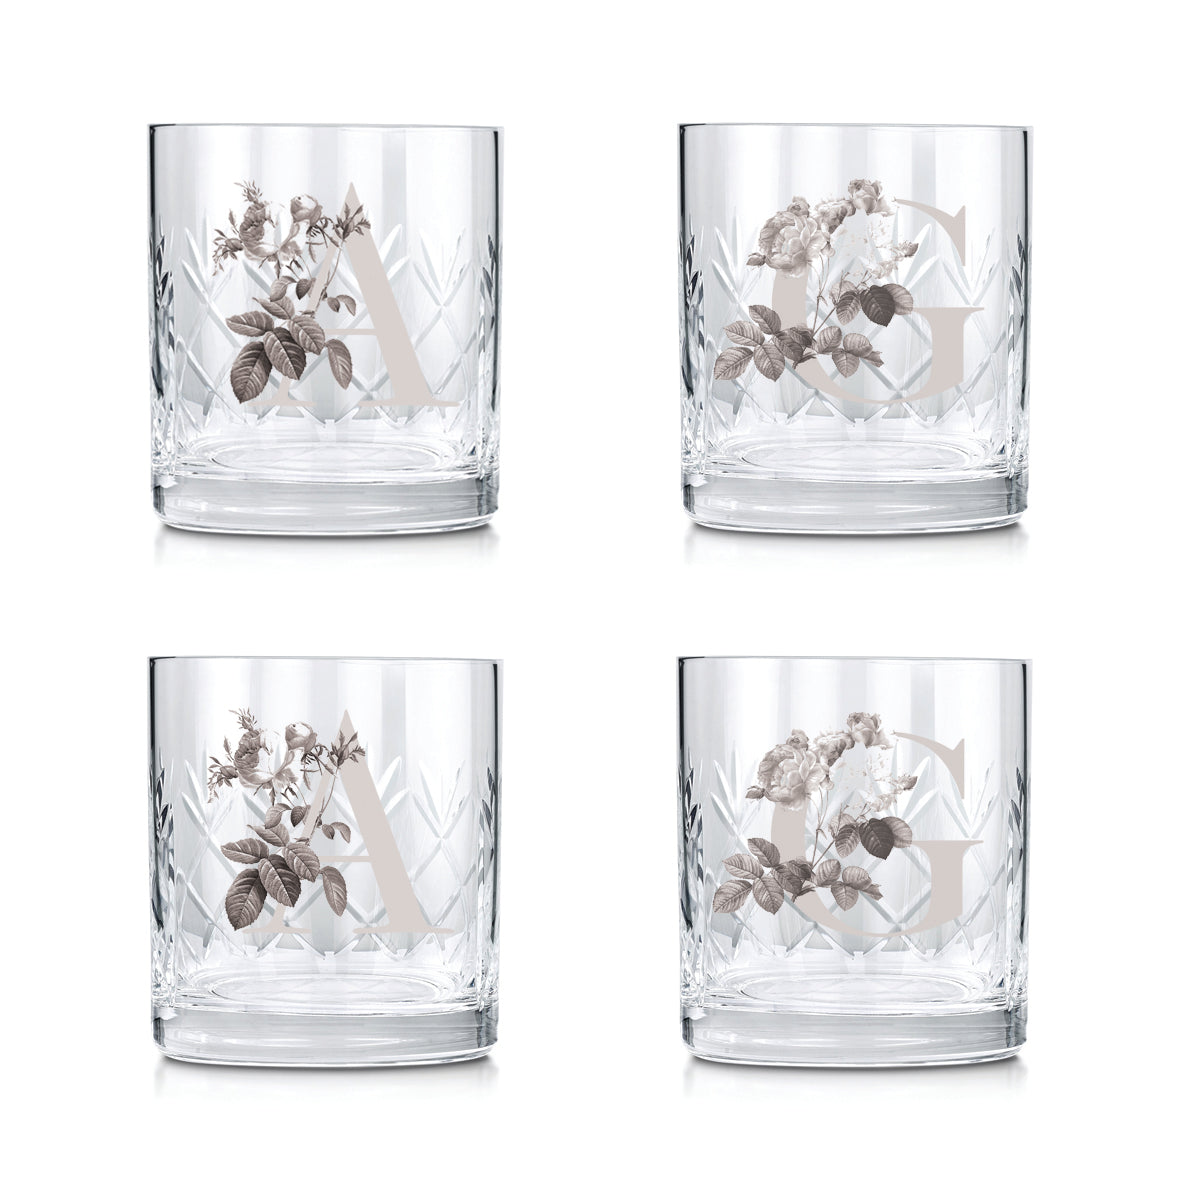 Engraved Cut Glass Tumblers With A Botanical Styles Initial